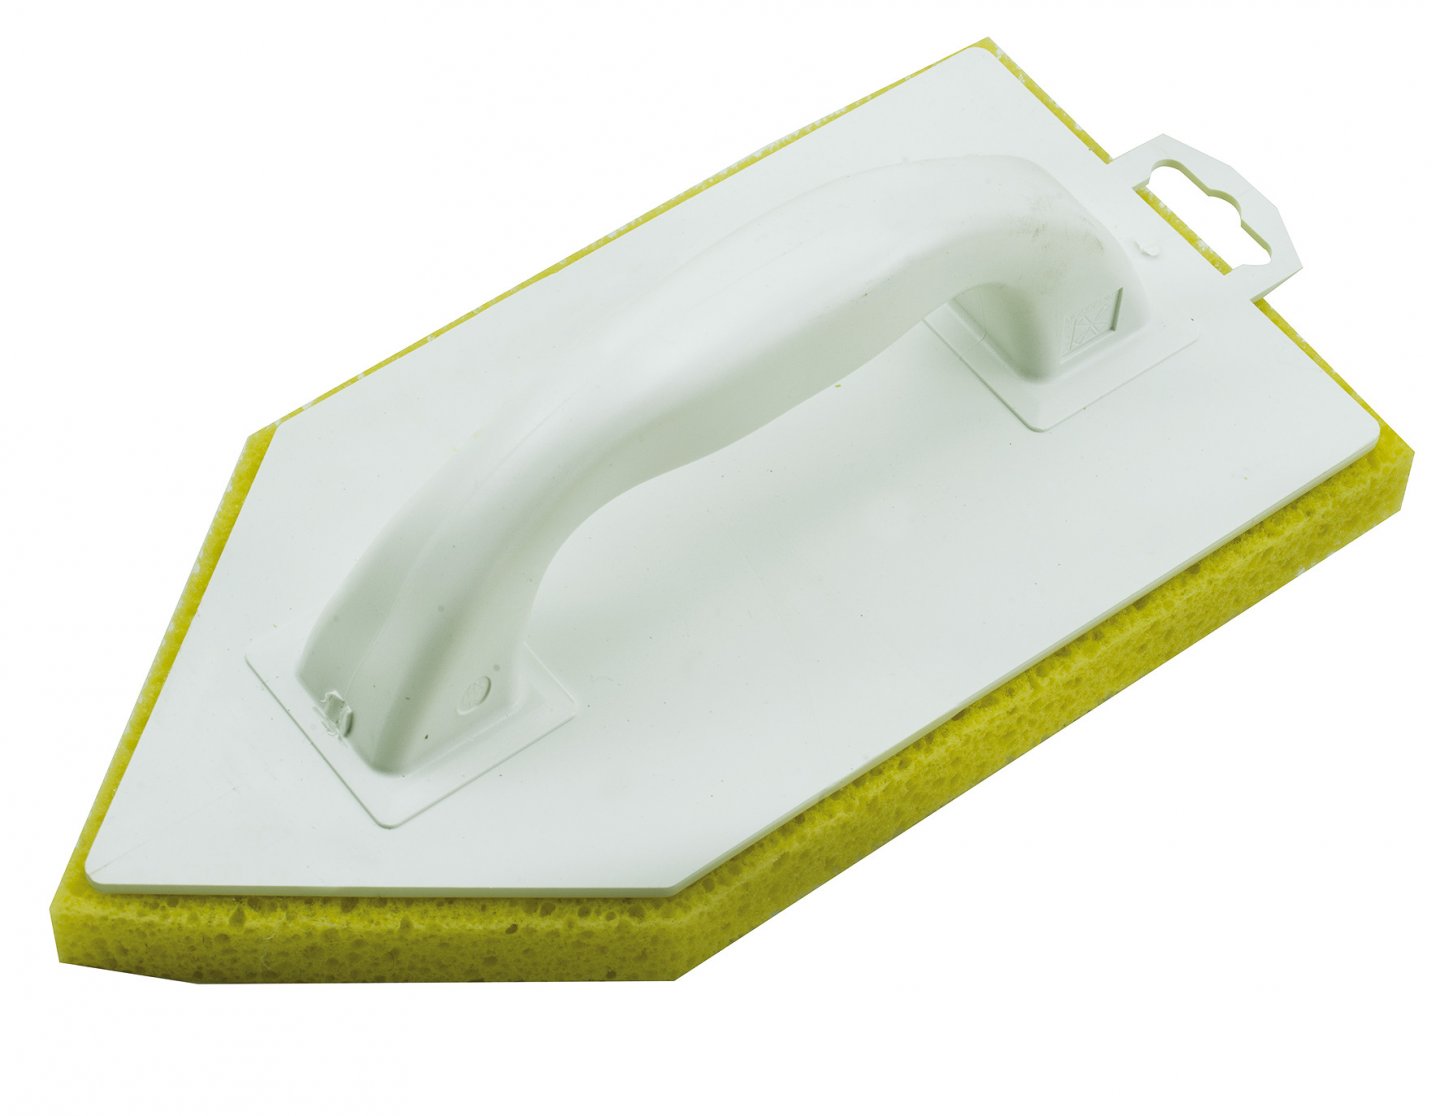 Monobloc pointed cleaning float